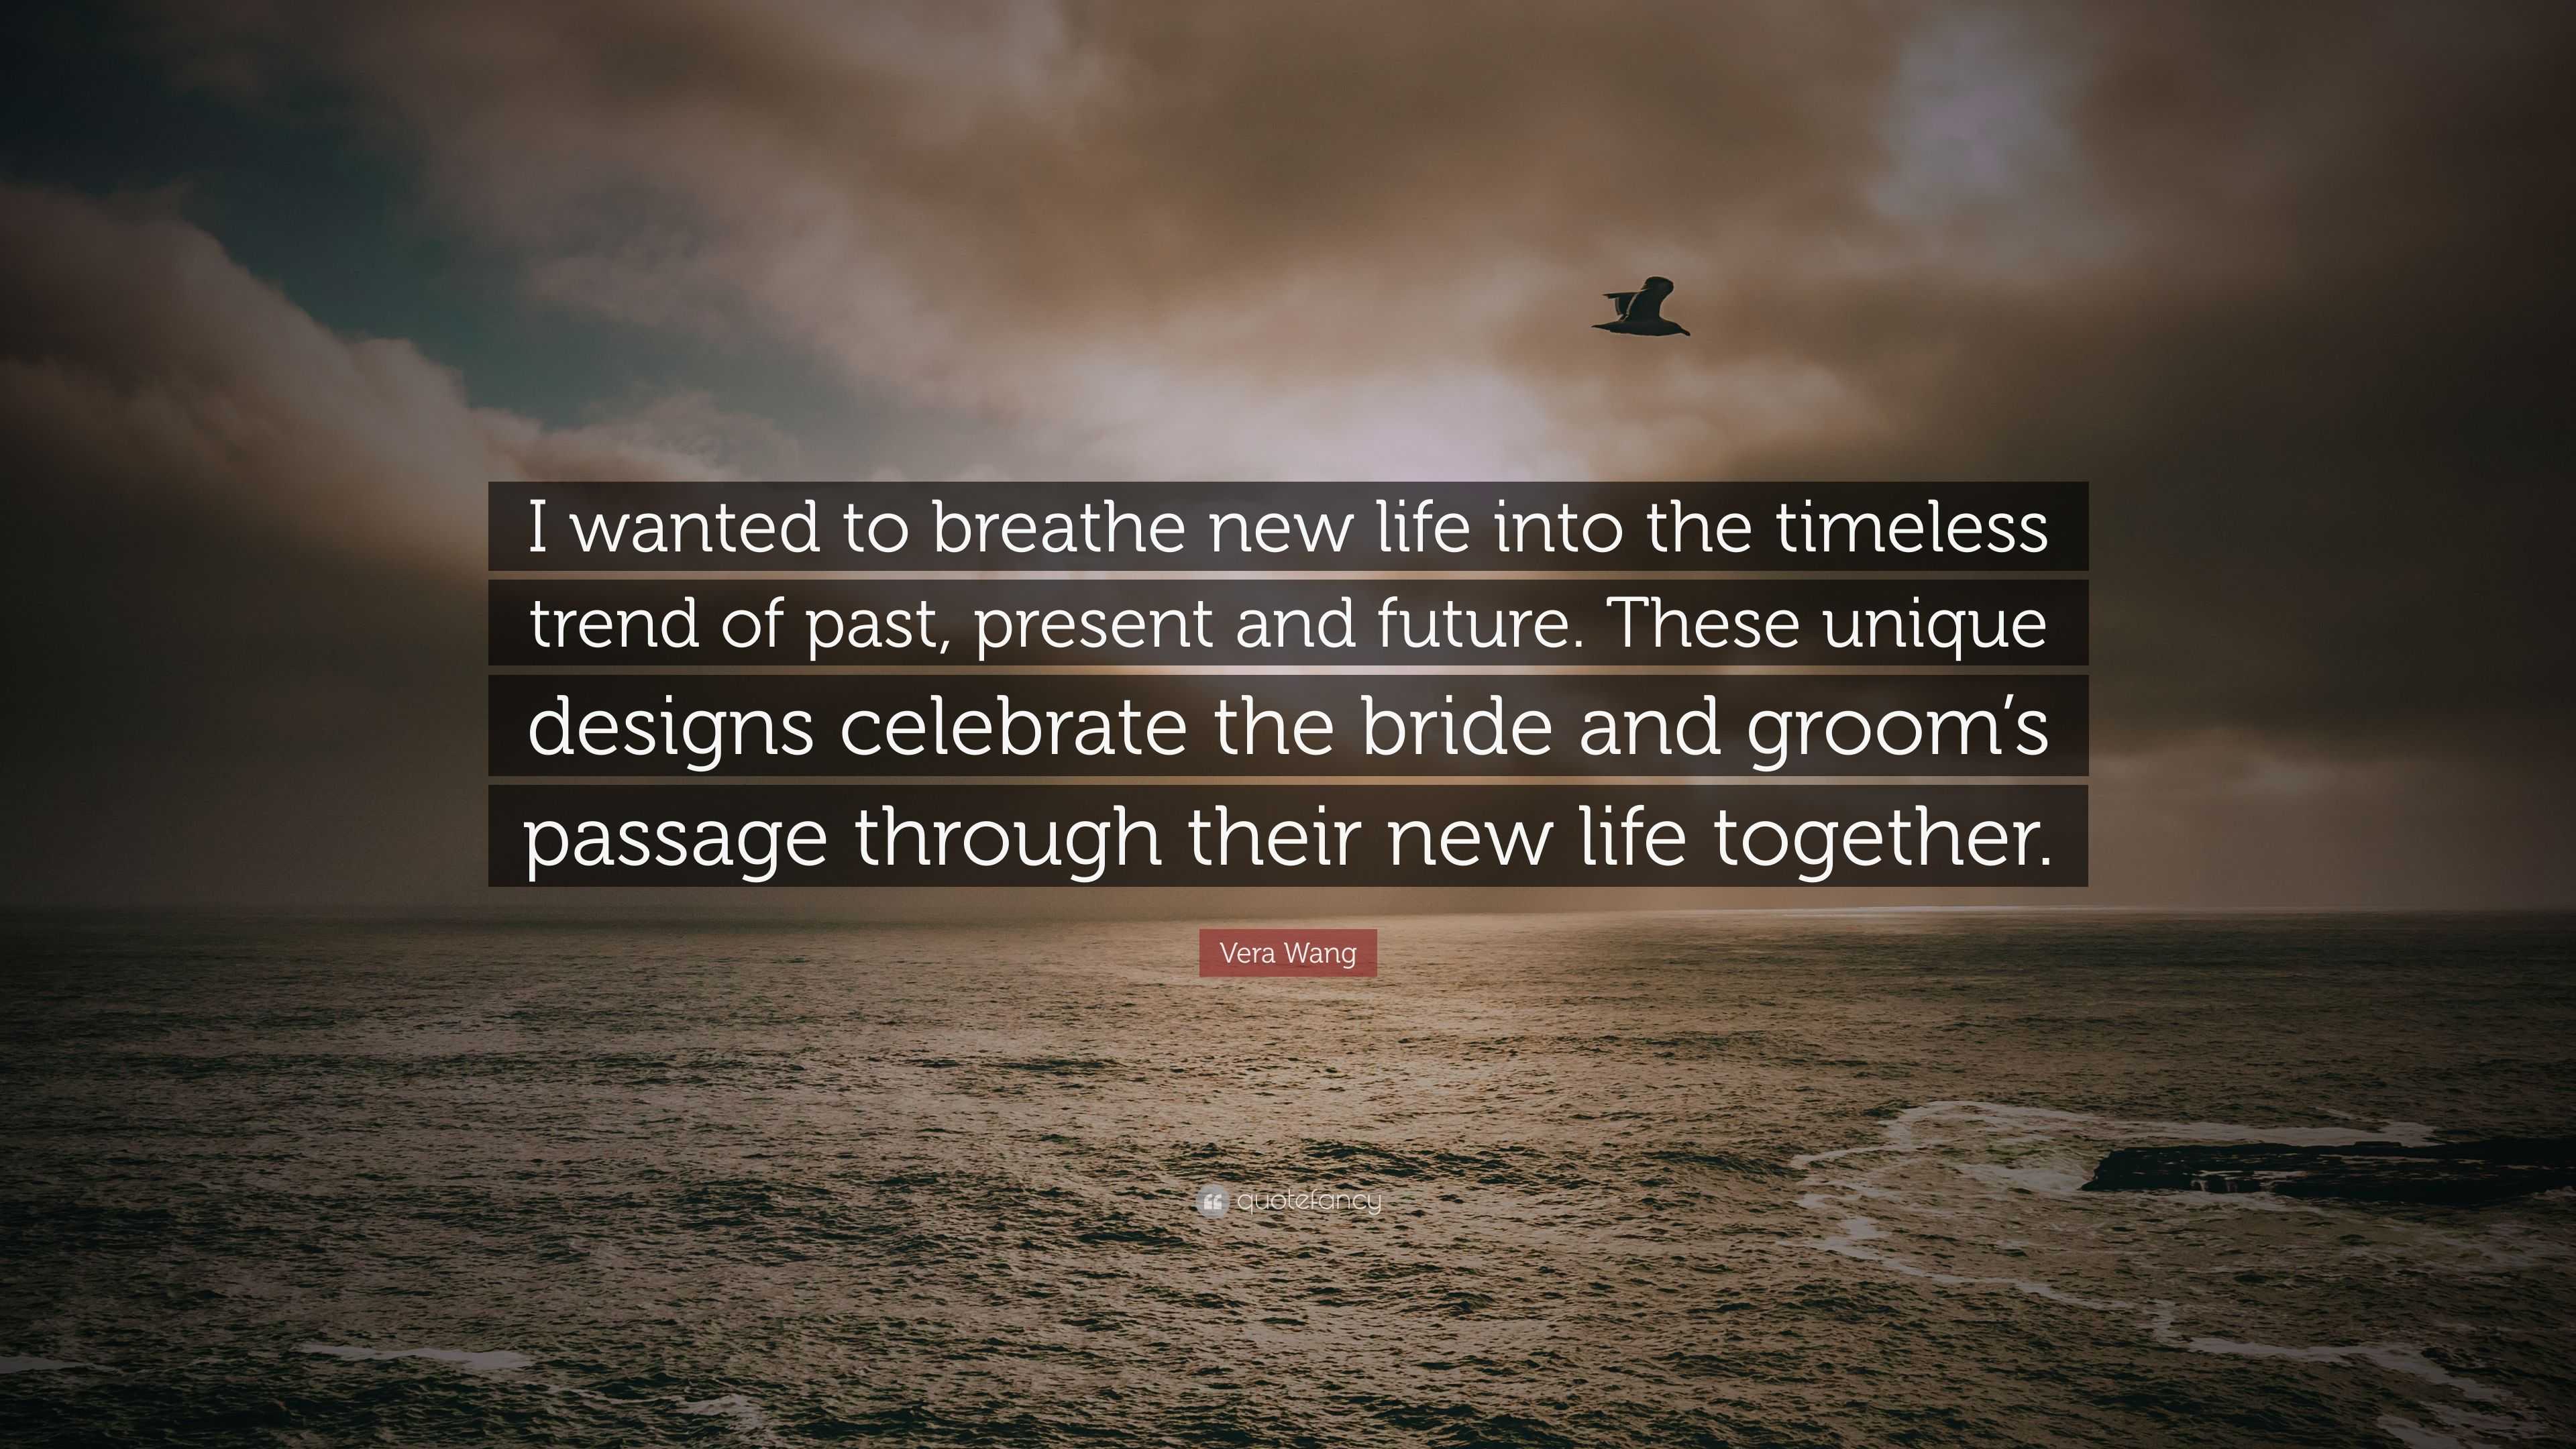 https://quotefancy.com/media/wallpaper/3840x2160/3793925-Vera-Wang-Quote-I-wanted-to-breathe-new-life-into-the-timeless.jpg